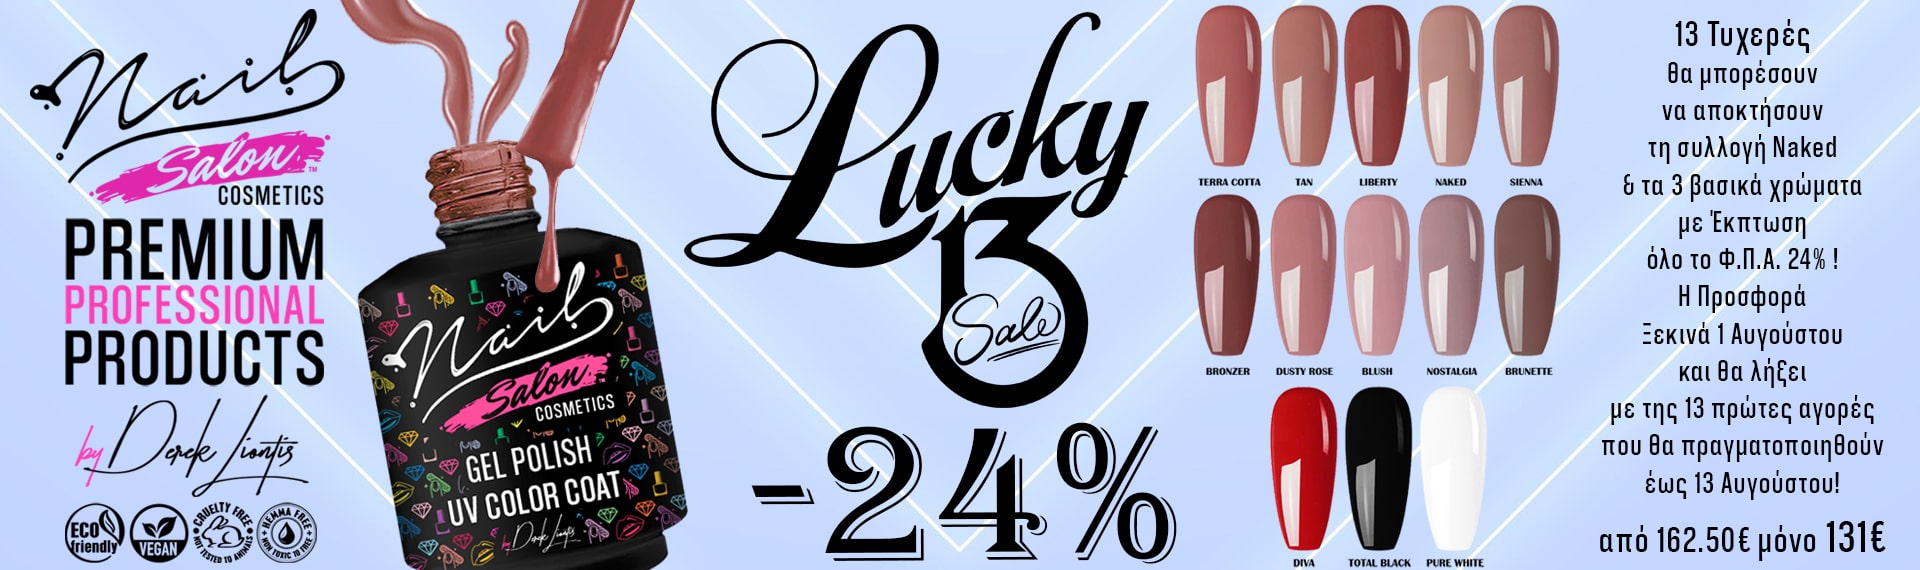 Lucky_13_Offer_Nail_Salon_healthy_professional_cosmetics_vegan_non_toxic_free_no_tested_on_animals_cruelty_free_products